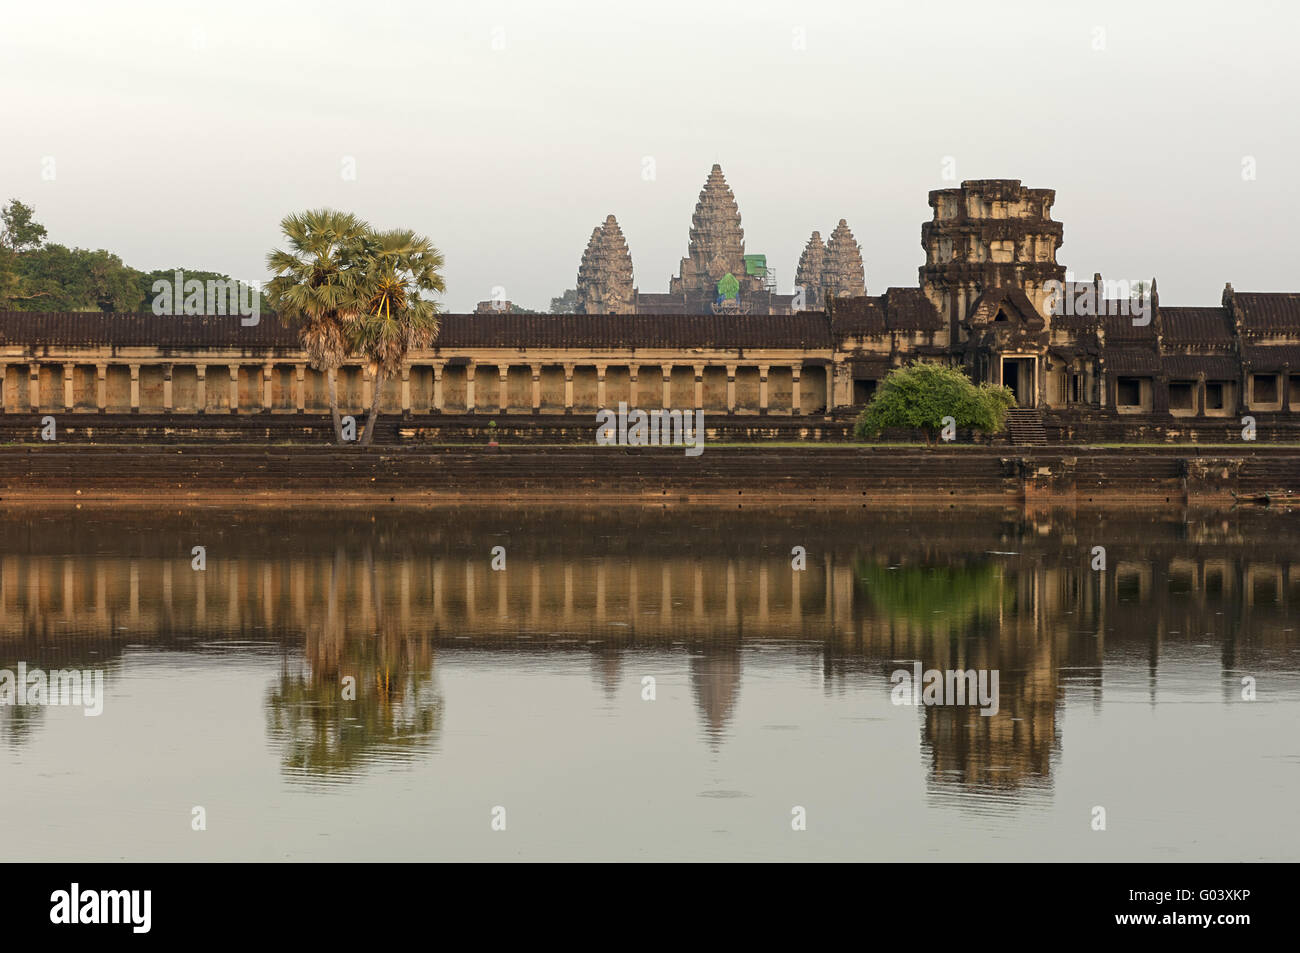 west wing of the Angkor Wat temple, Cambodia Stock Photo